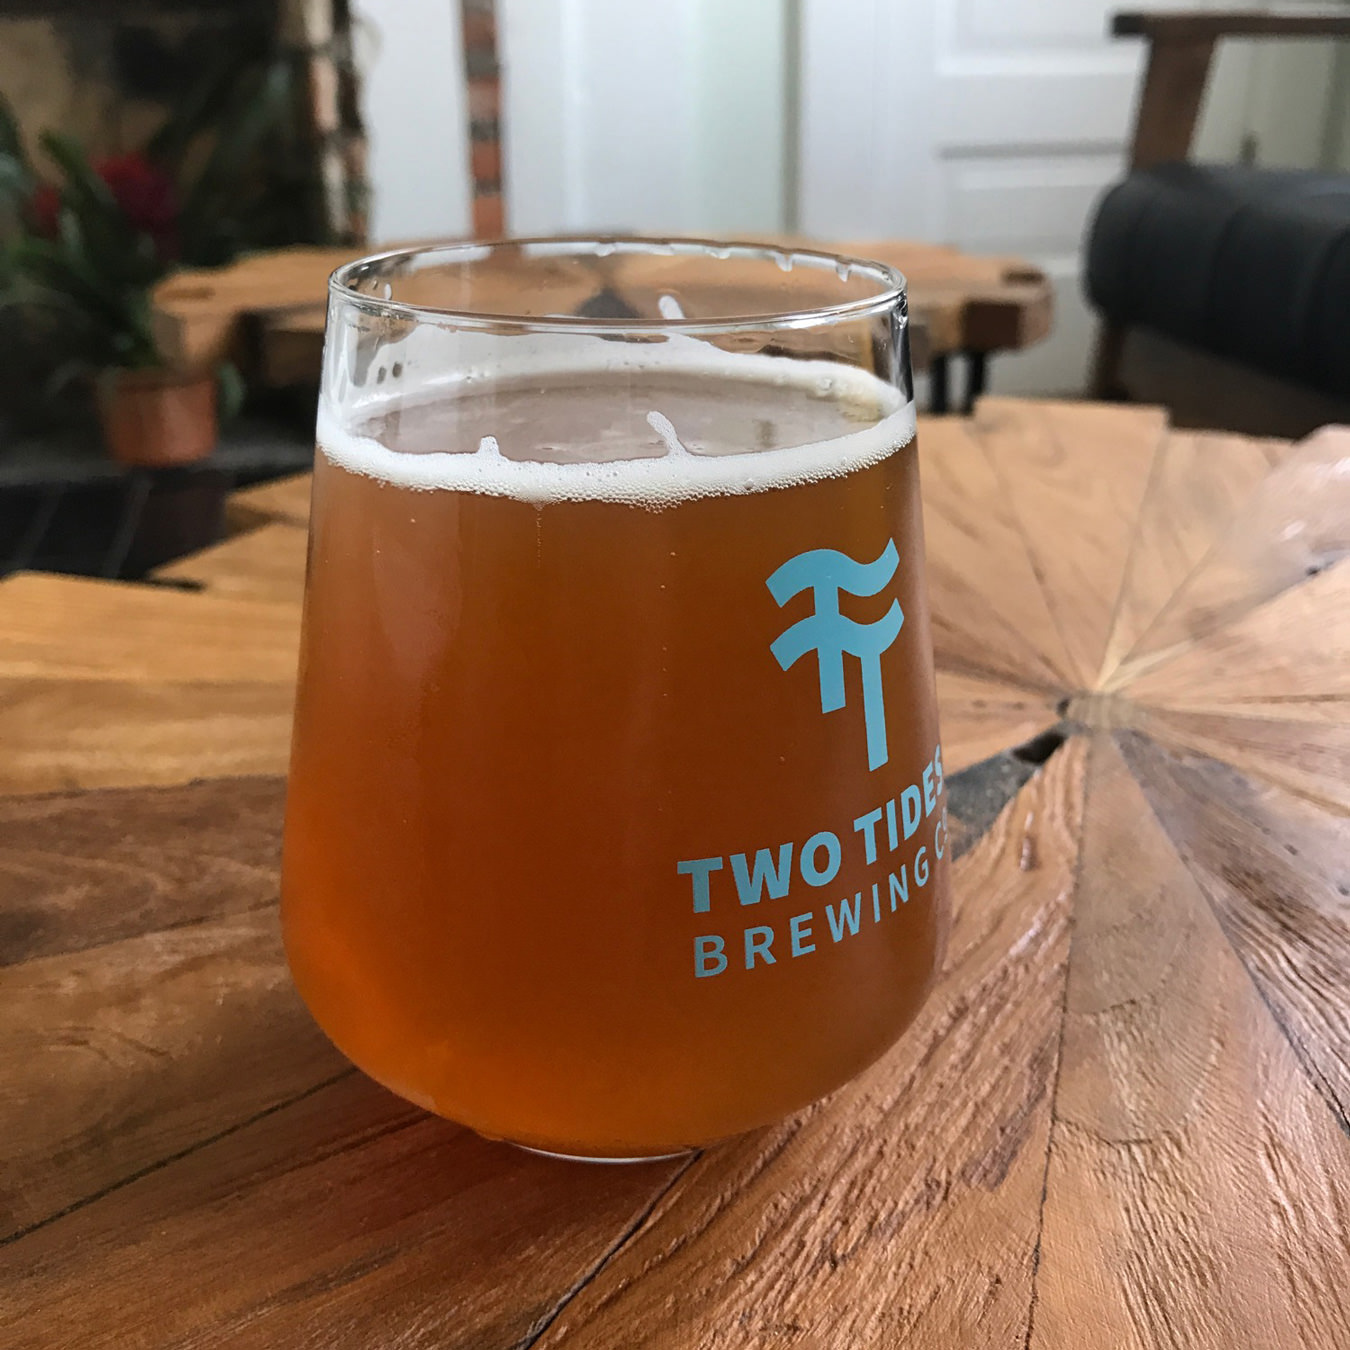 A photograph of the standard Two Tides Brewing Co. glass.